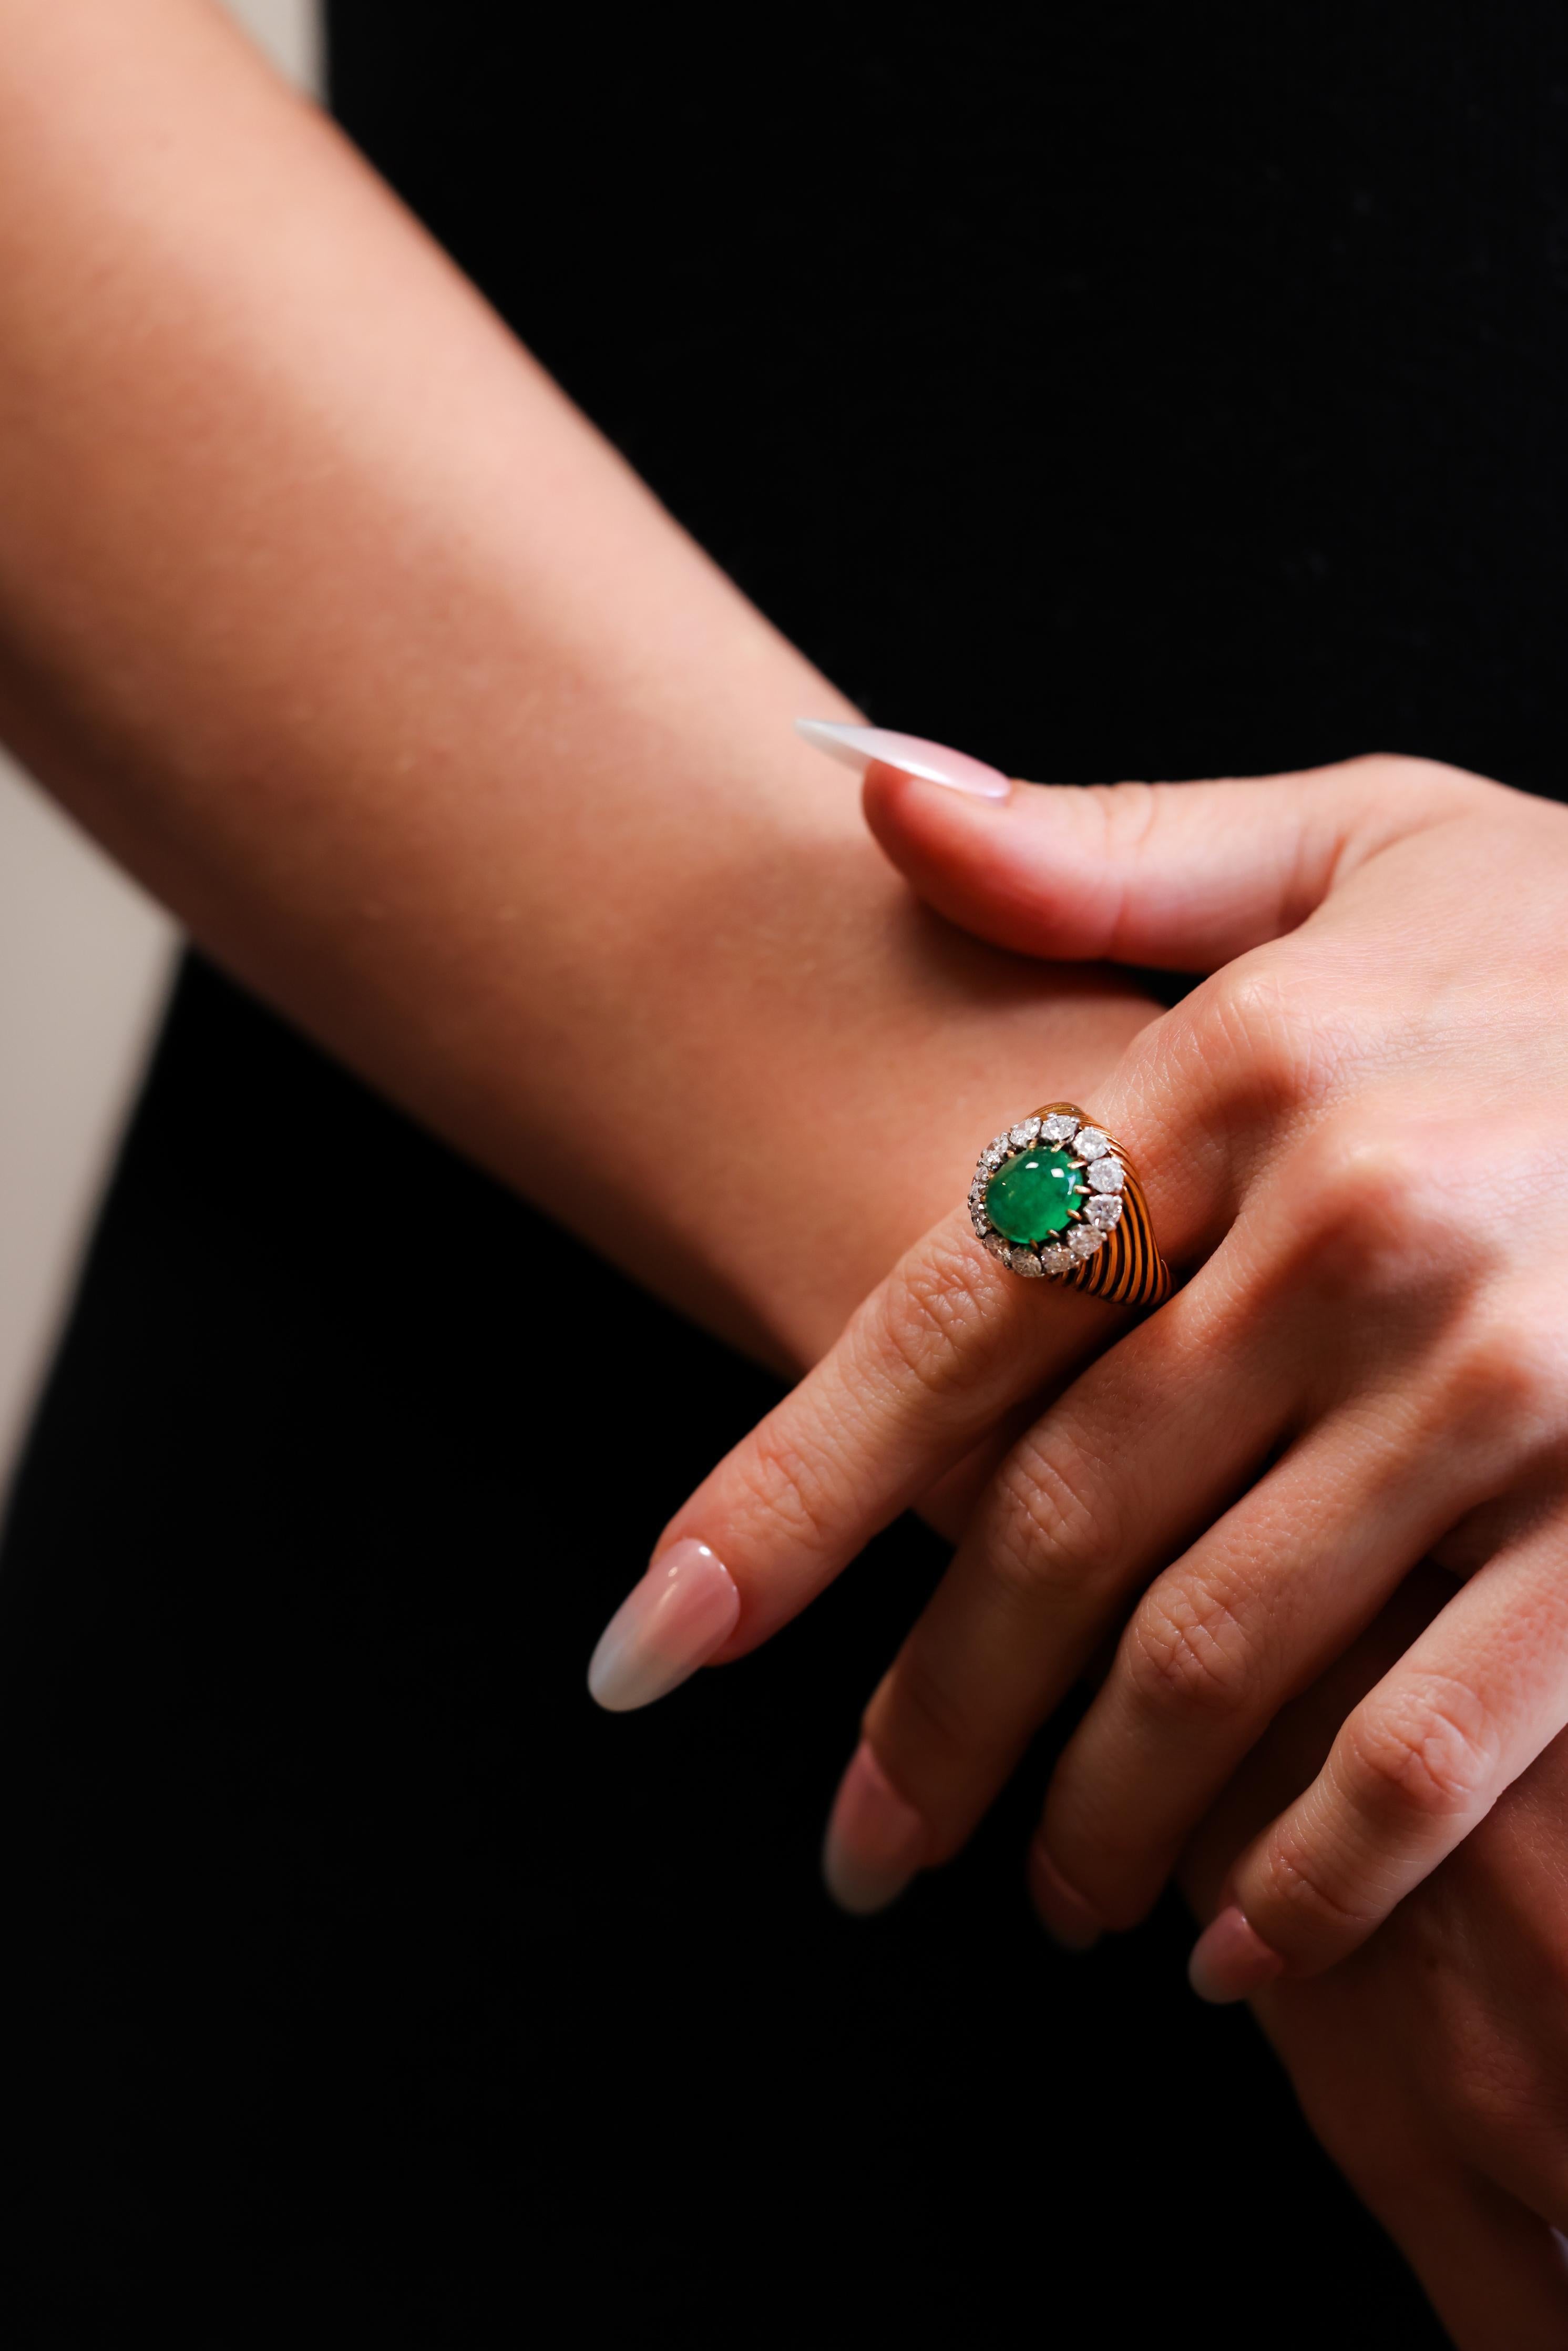 One Vintage Van Cleef & Arpels French Emerald Diamond 18k Yellow Gold Ring. Featuring one cabochon cut emerald weighing approximately 3.00 carats. Accented by 12 round brilliant cut diamonds with a total weight of approximately 1.40 carats, graded